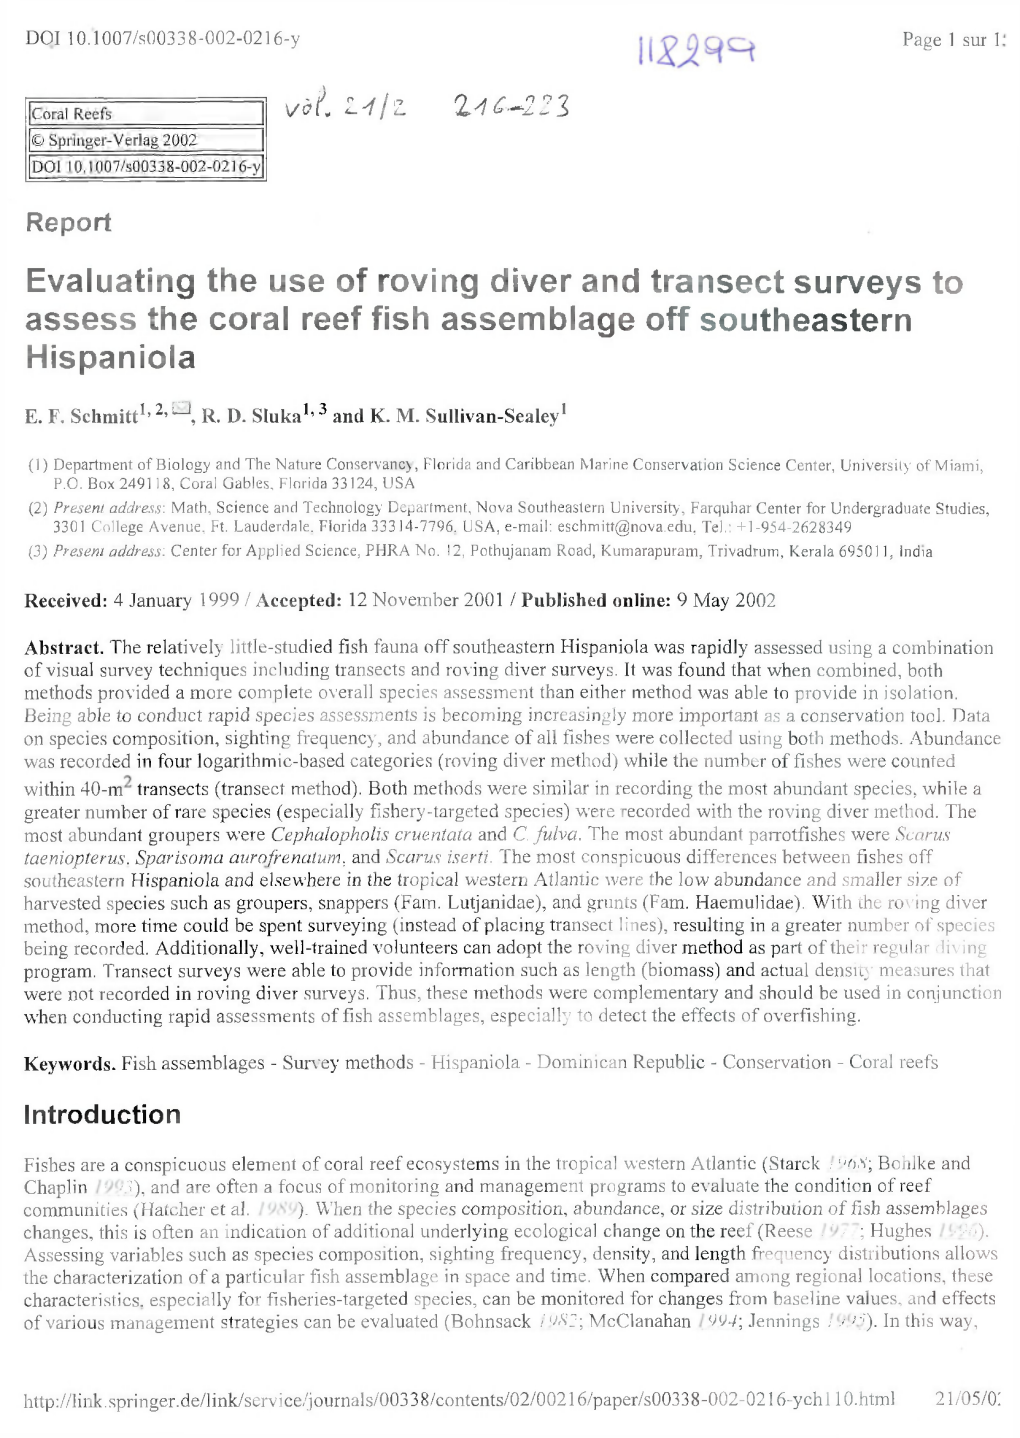 Evaluating the Use of Roving Diver and Transect Surveys to Assess the Coral Reef Fish Assemblage Off Southeastern Hispaniola